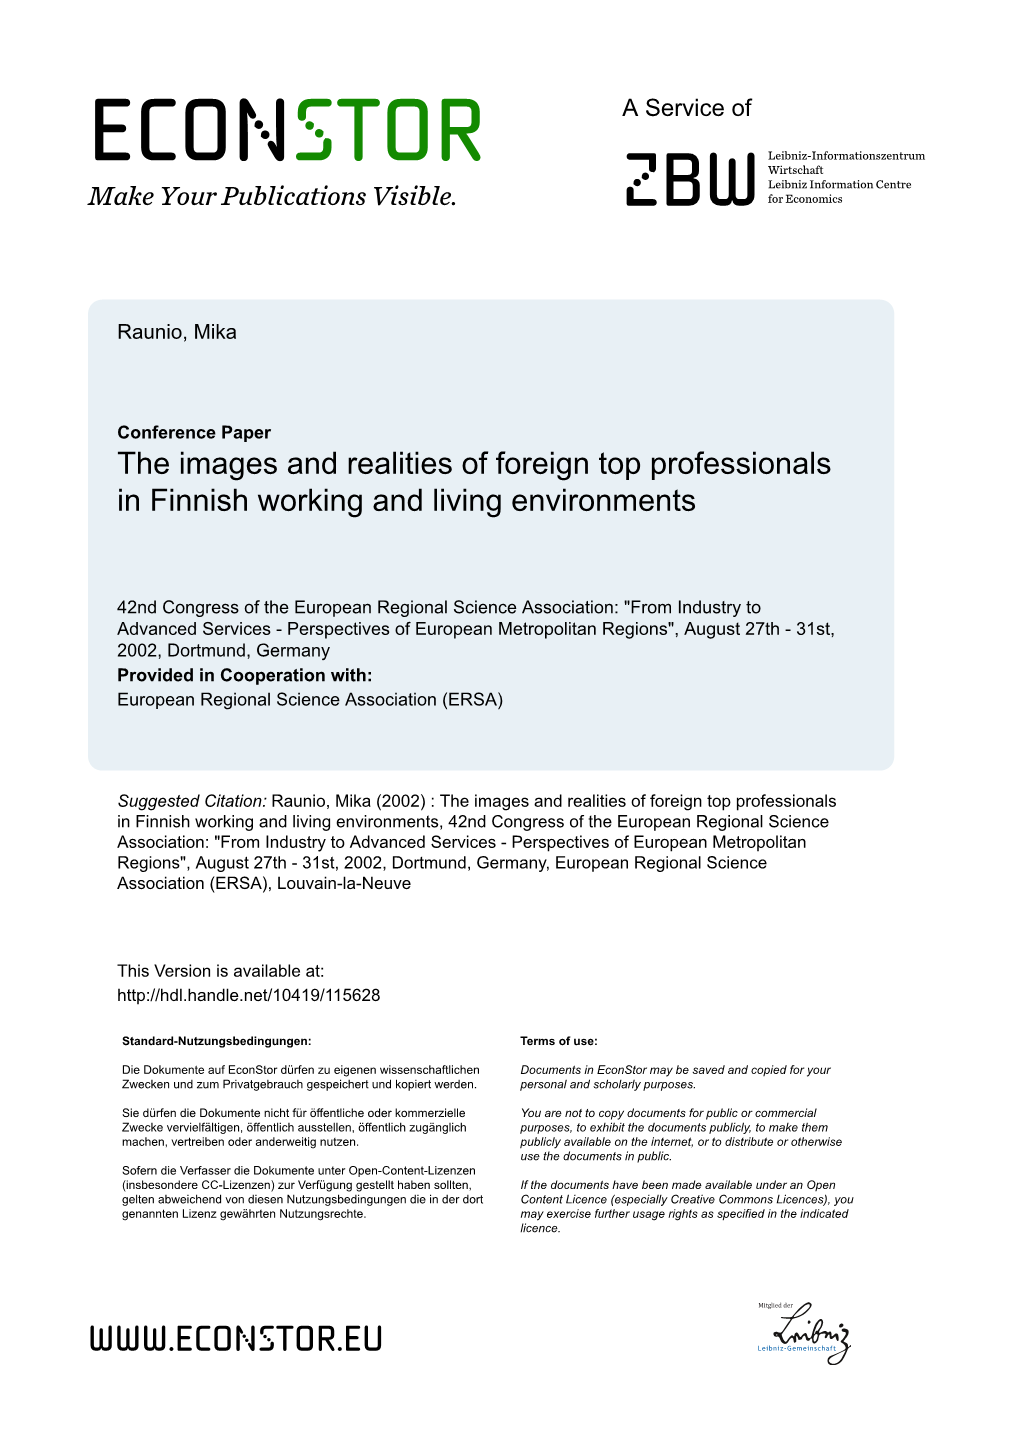 The Images and Realities of Foreign Top Professionals in Finnish Working and Living Environments